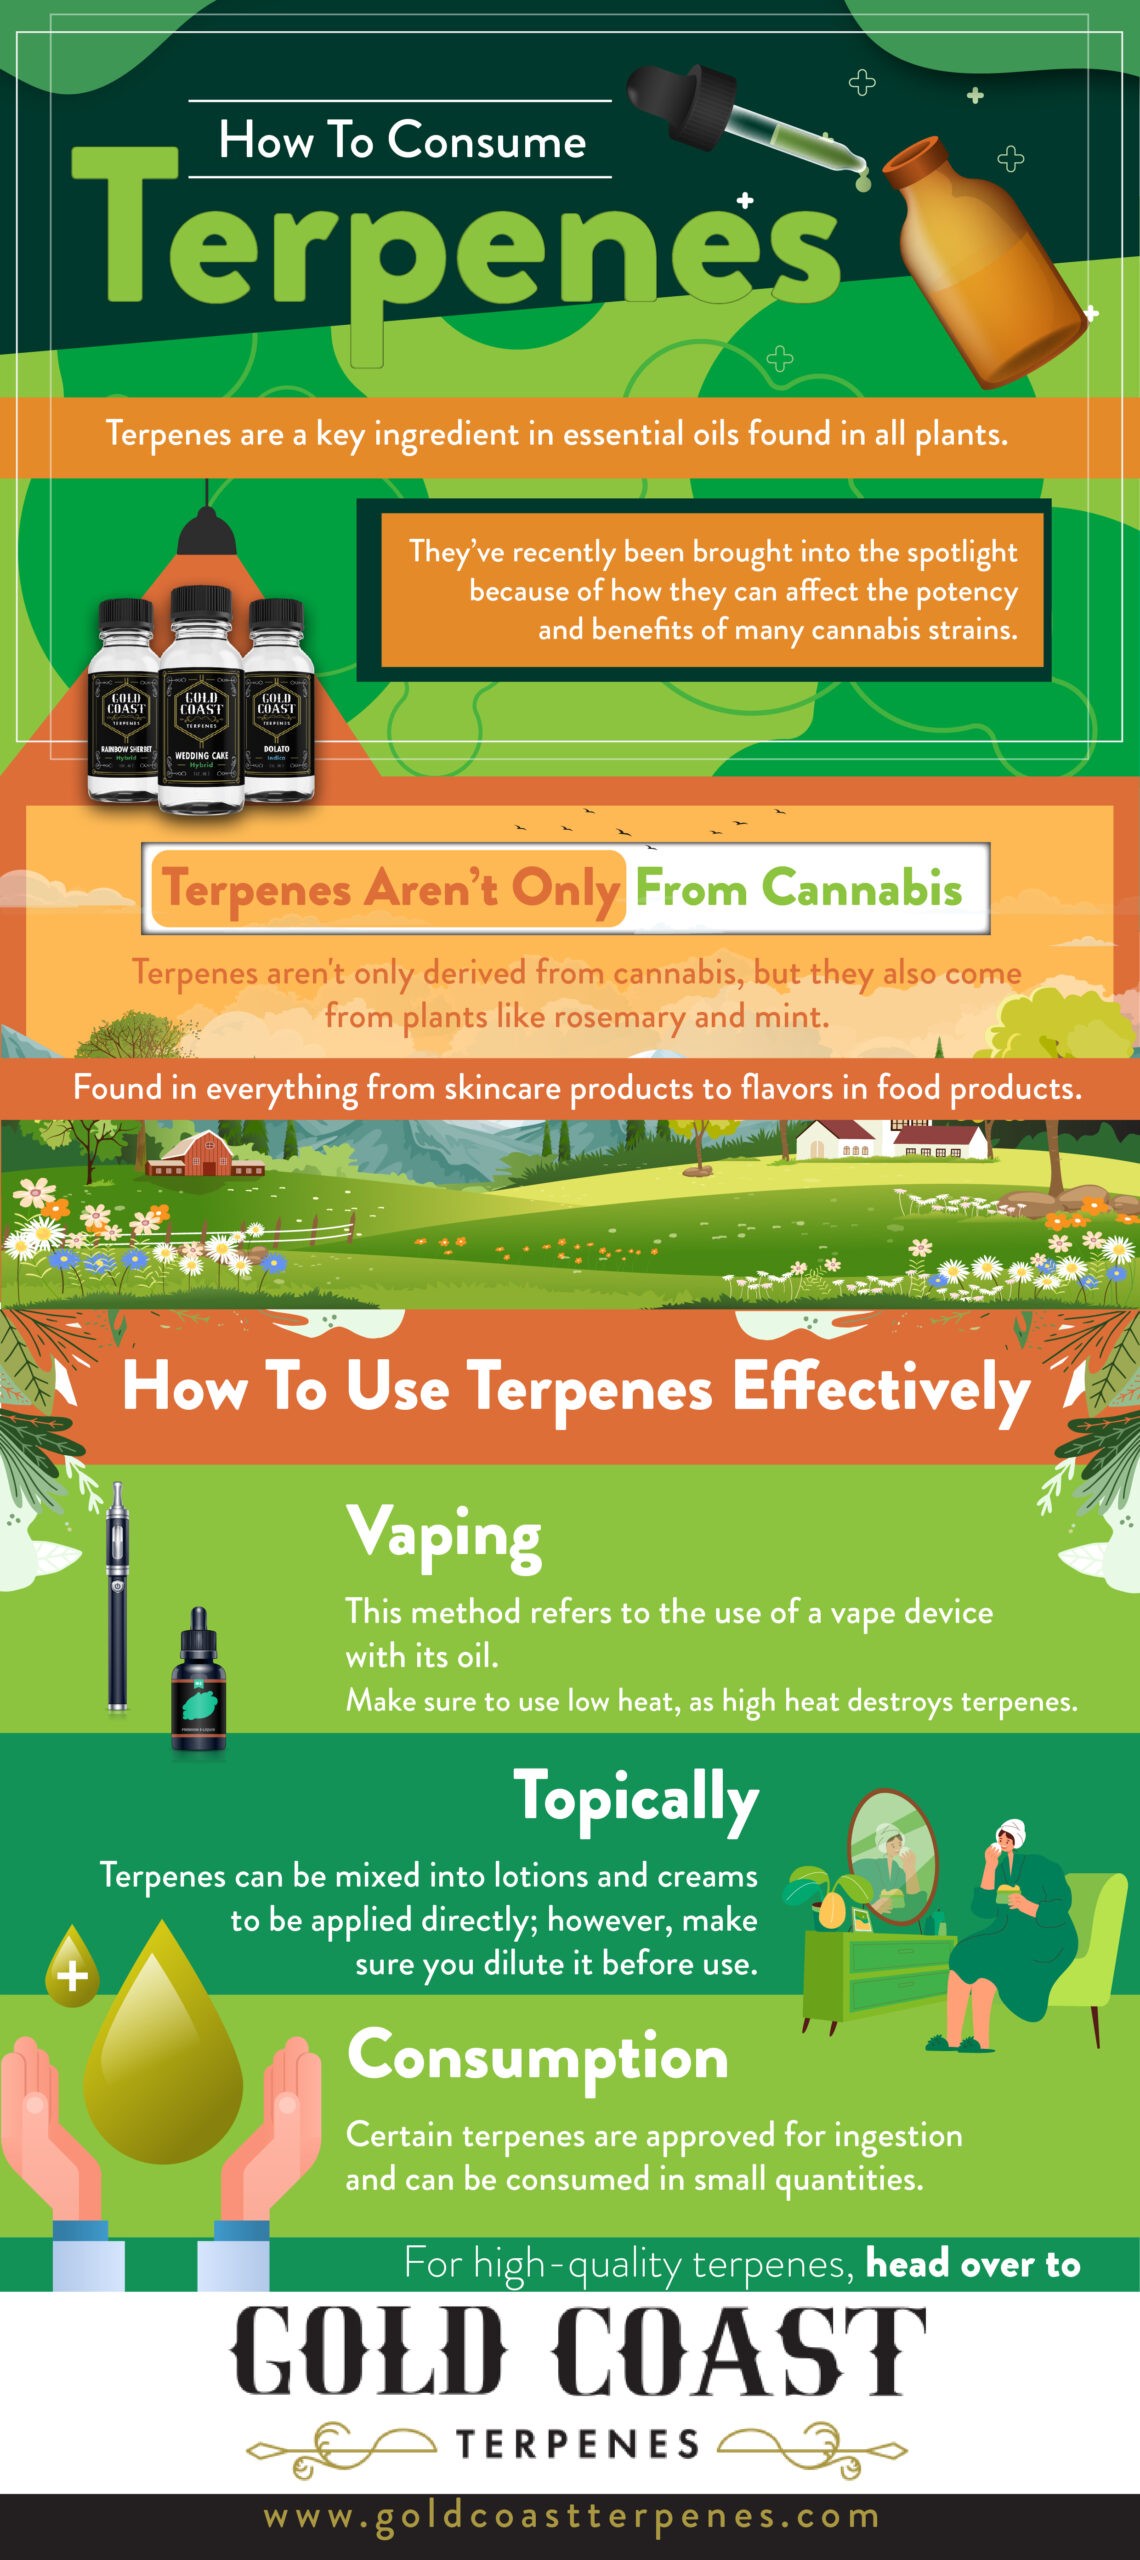 How to consume terpenes - Infograph